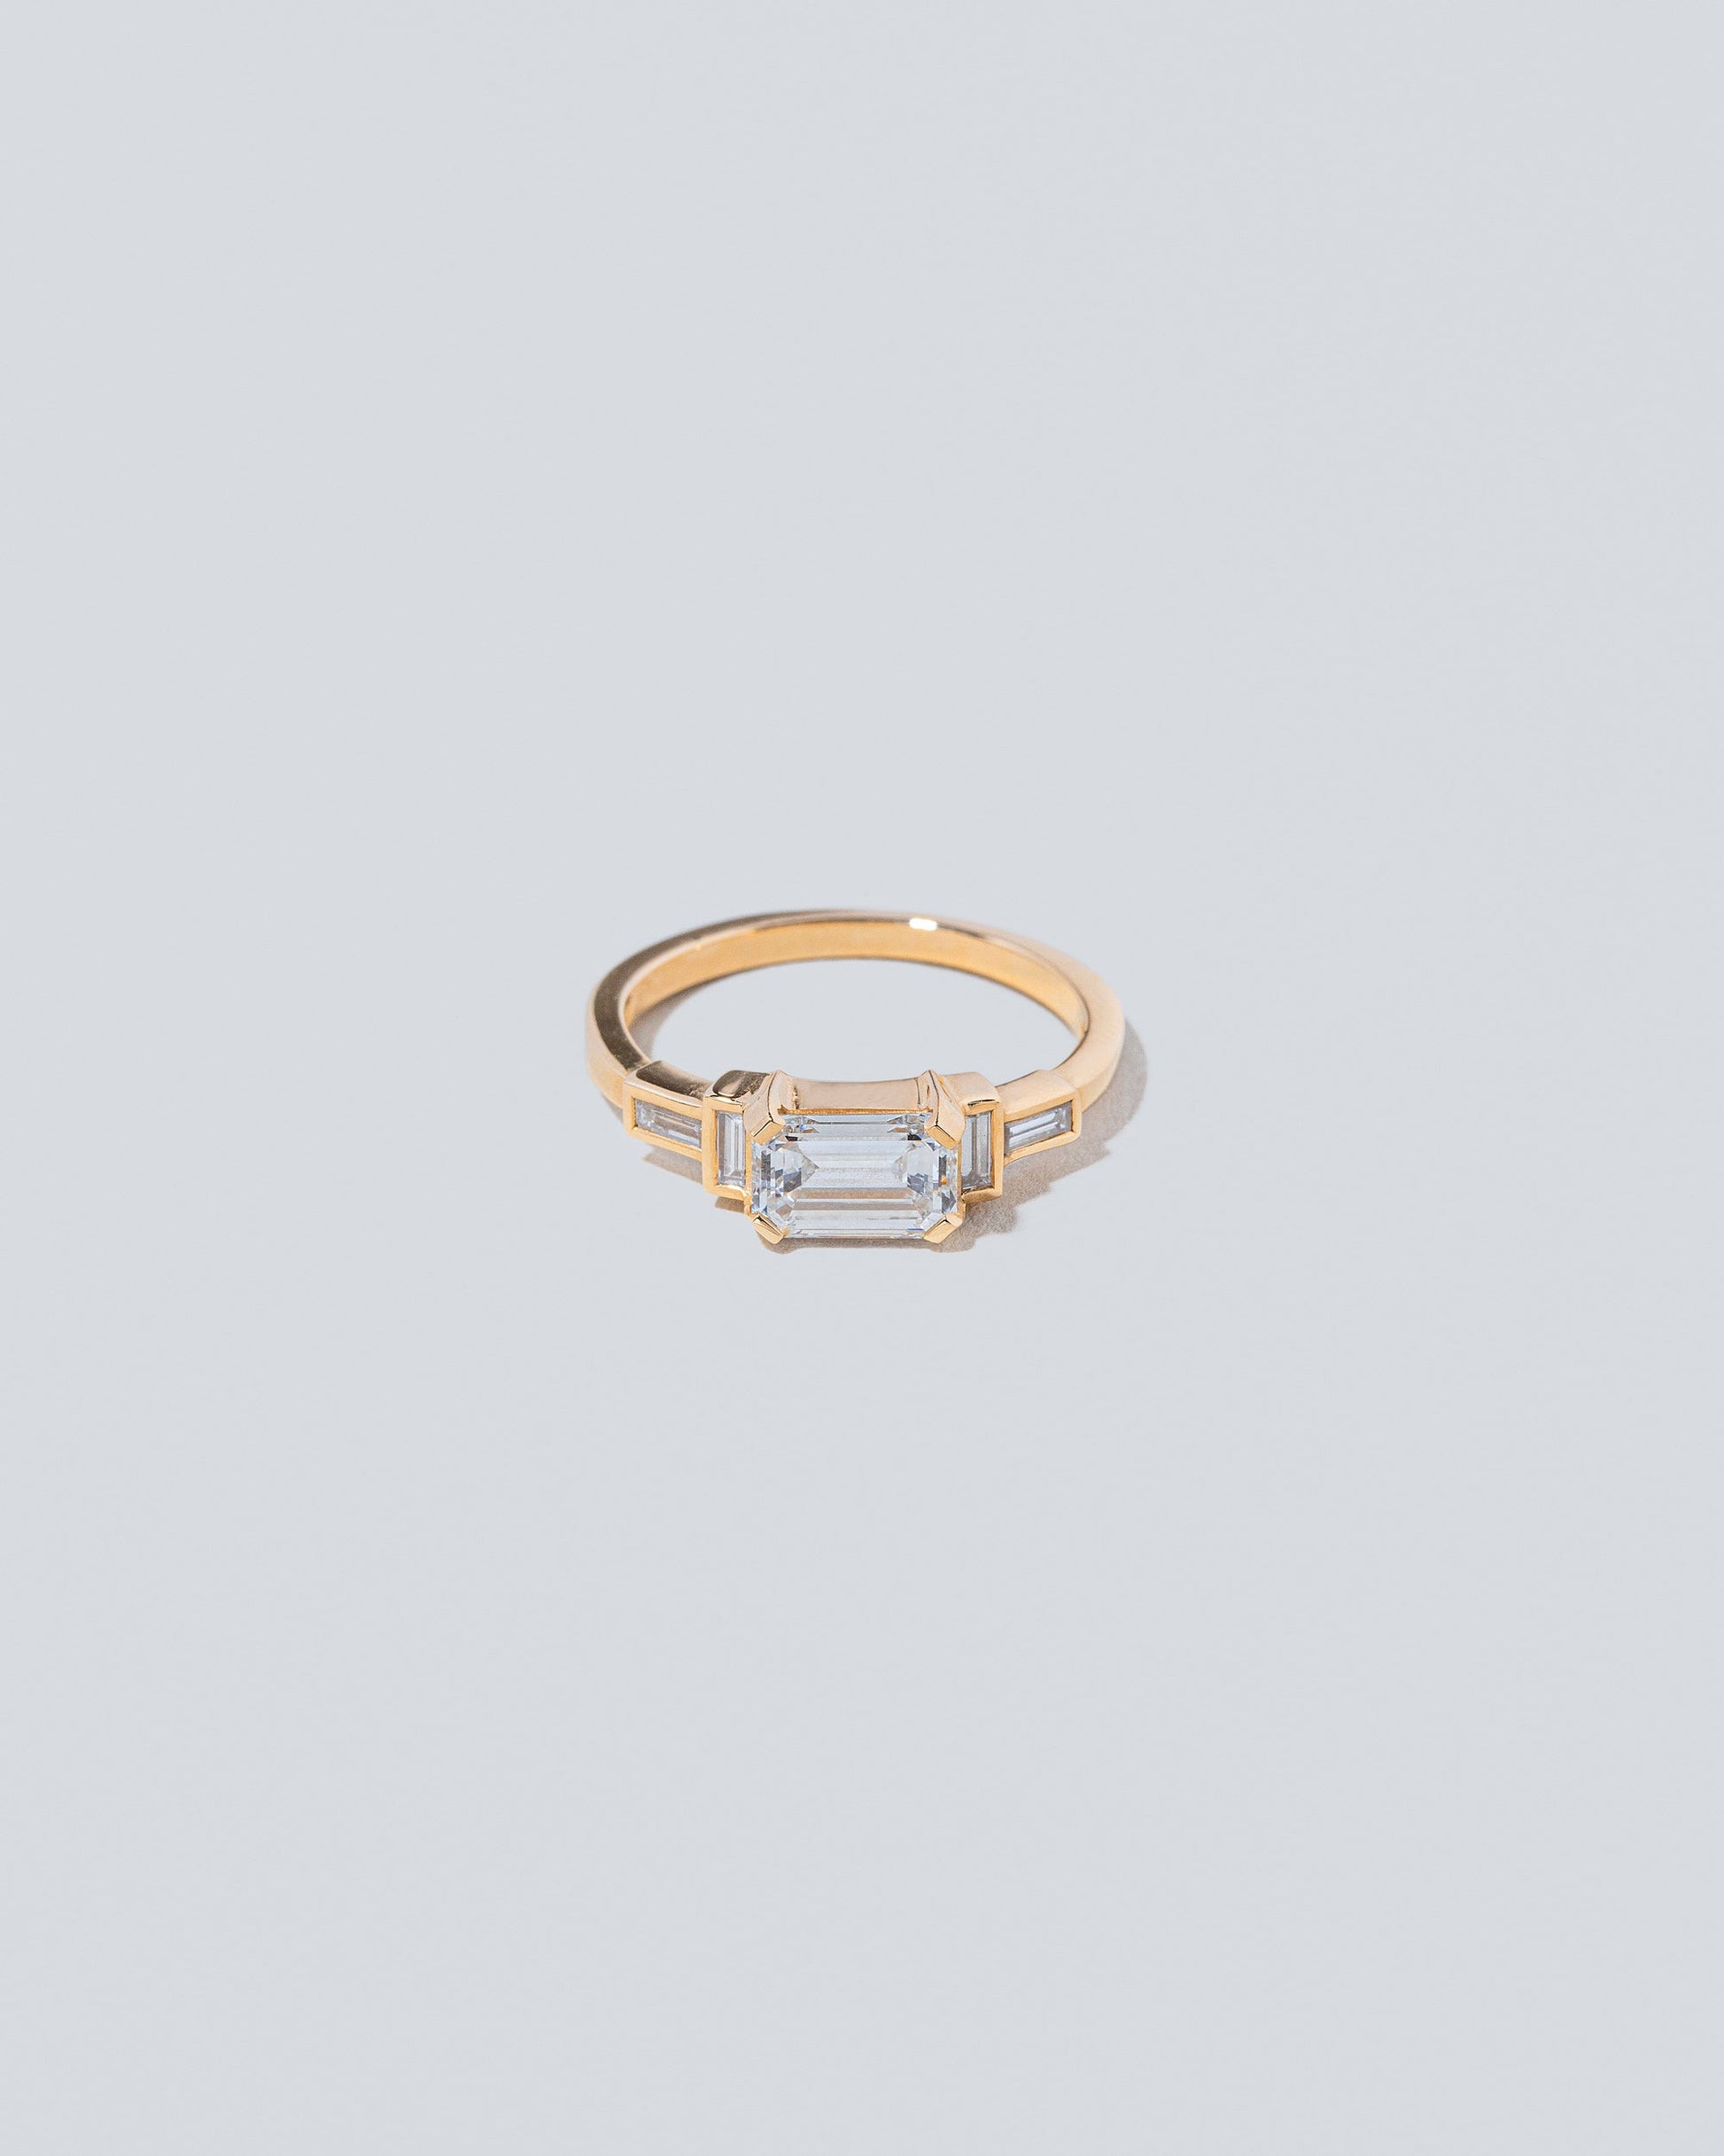 Gold Expression Ring on light color background.